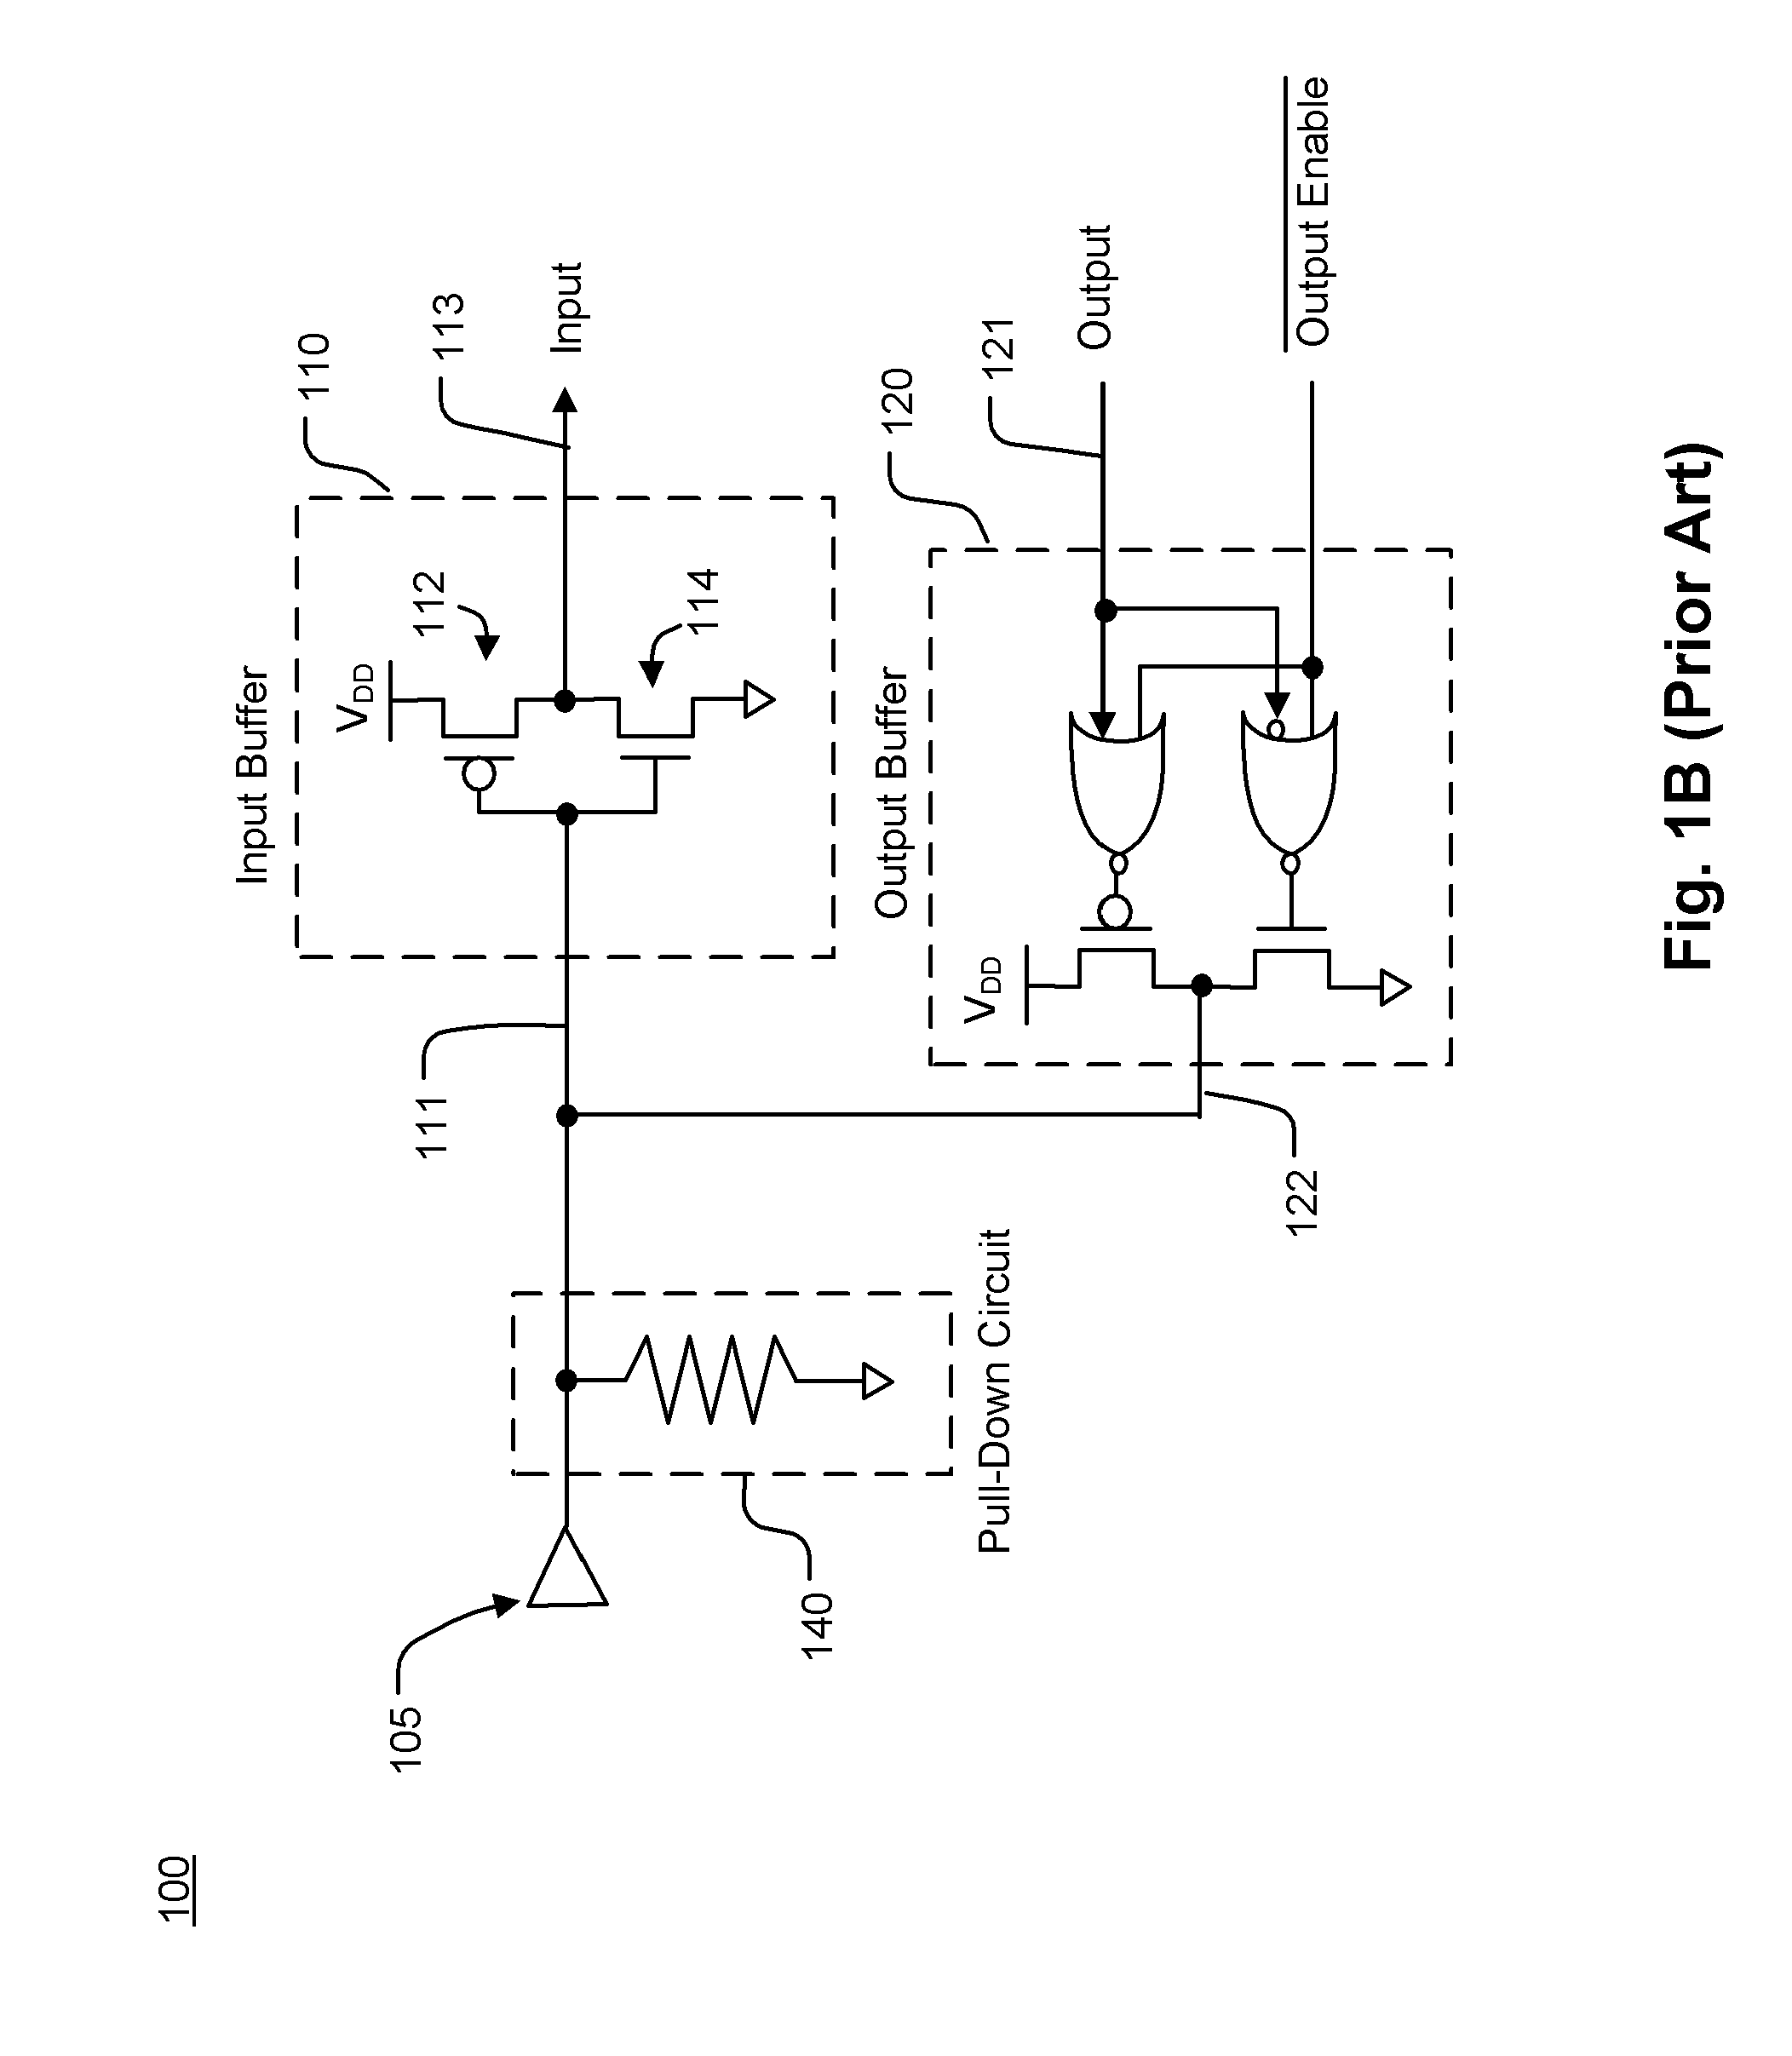 Apparatus and method to tolerate floating input pin for input buffer